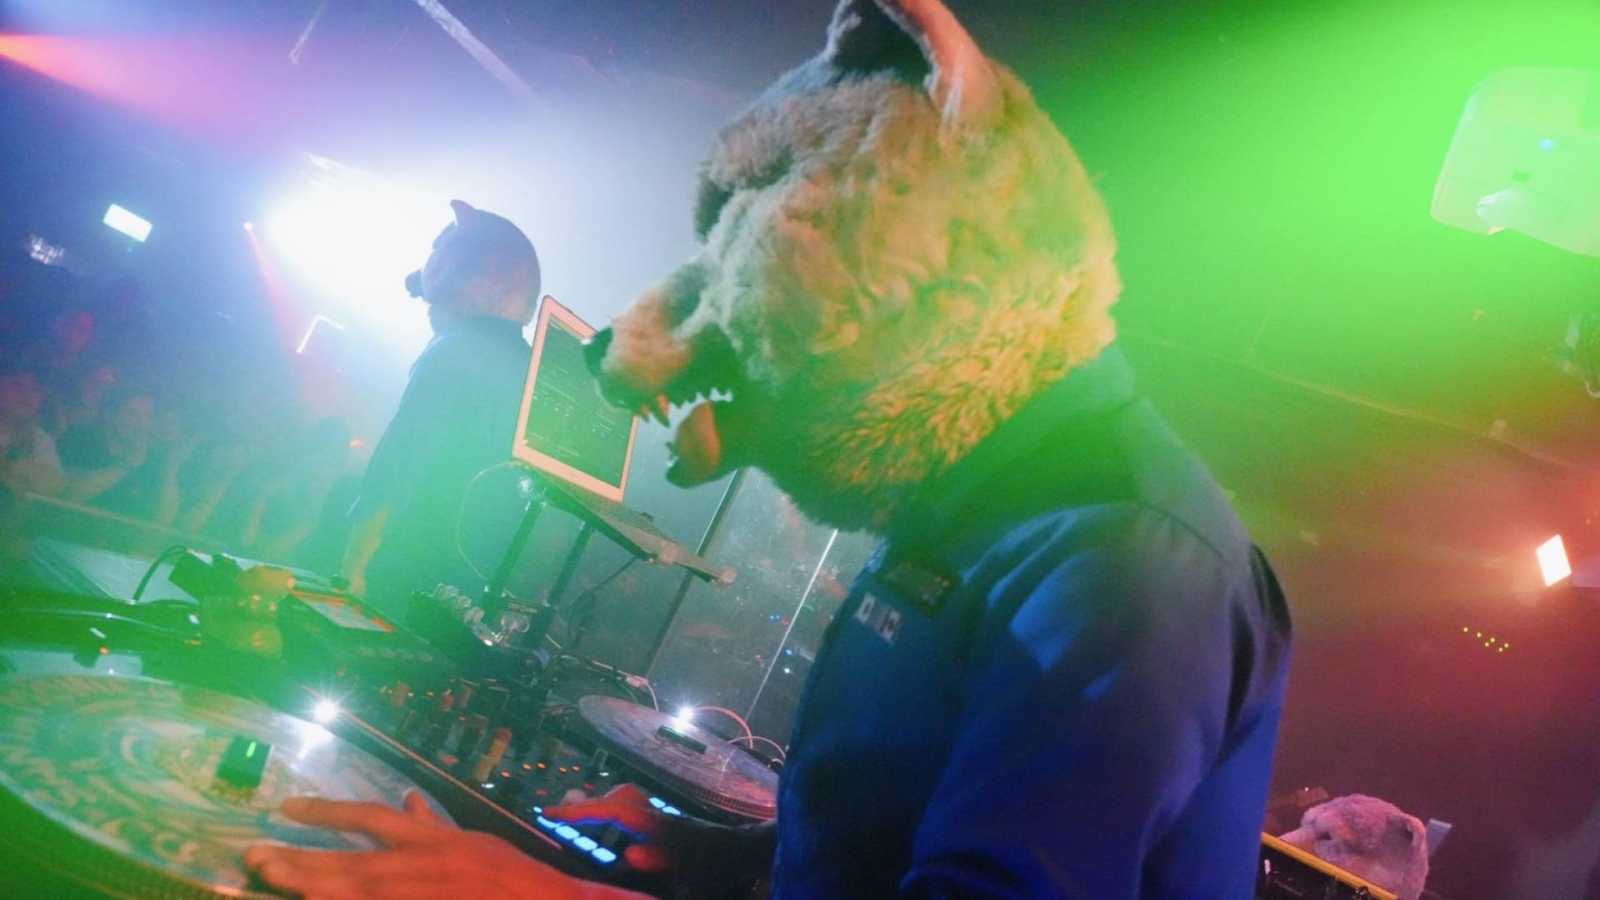 MAN WITH A MISSION "WOLVES ON PARADE TOUR" at Rebellion, Manchester © MAN WITH A MISSION